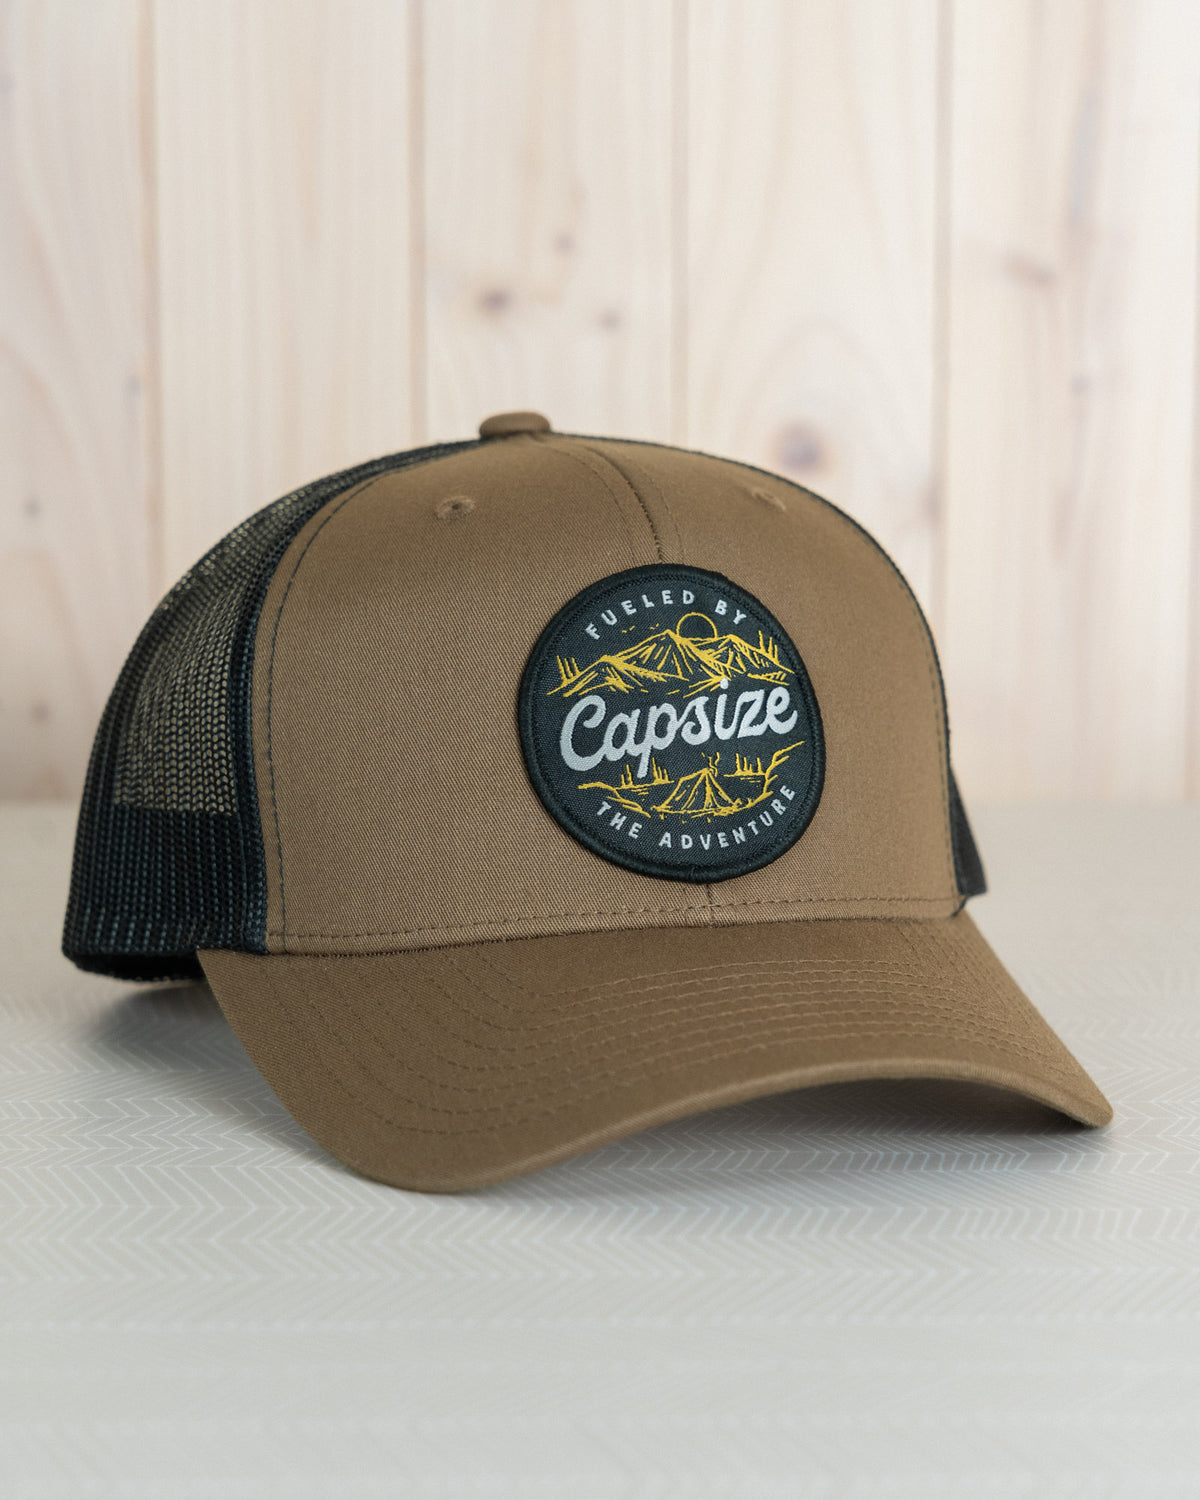 Fly Fishing Hats  Capsize Fly Fishing Tagged Fueled By The Adventure